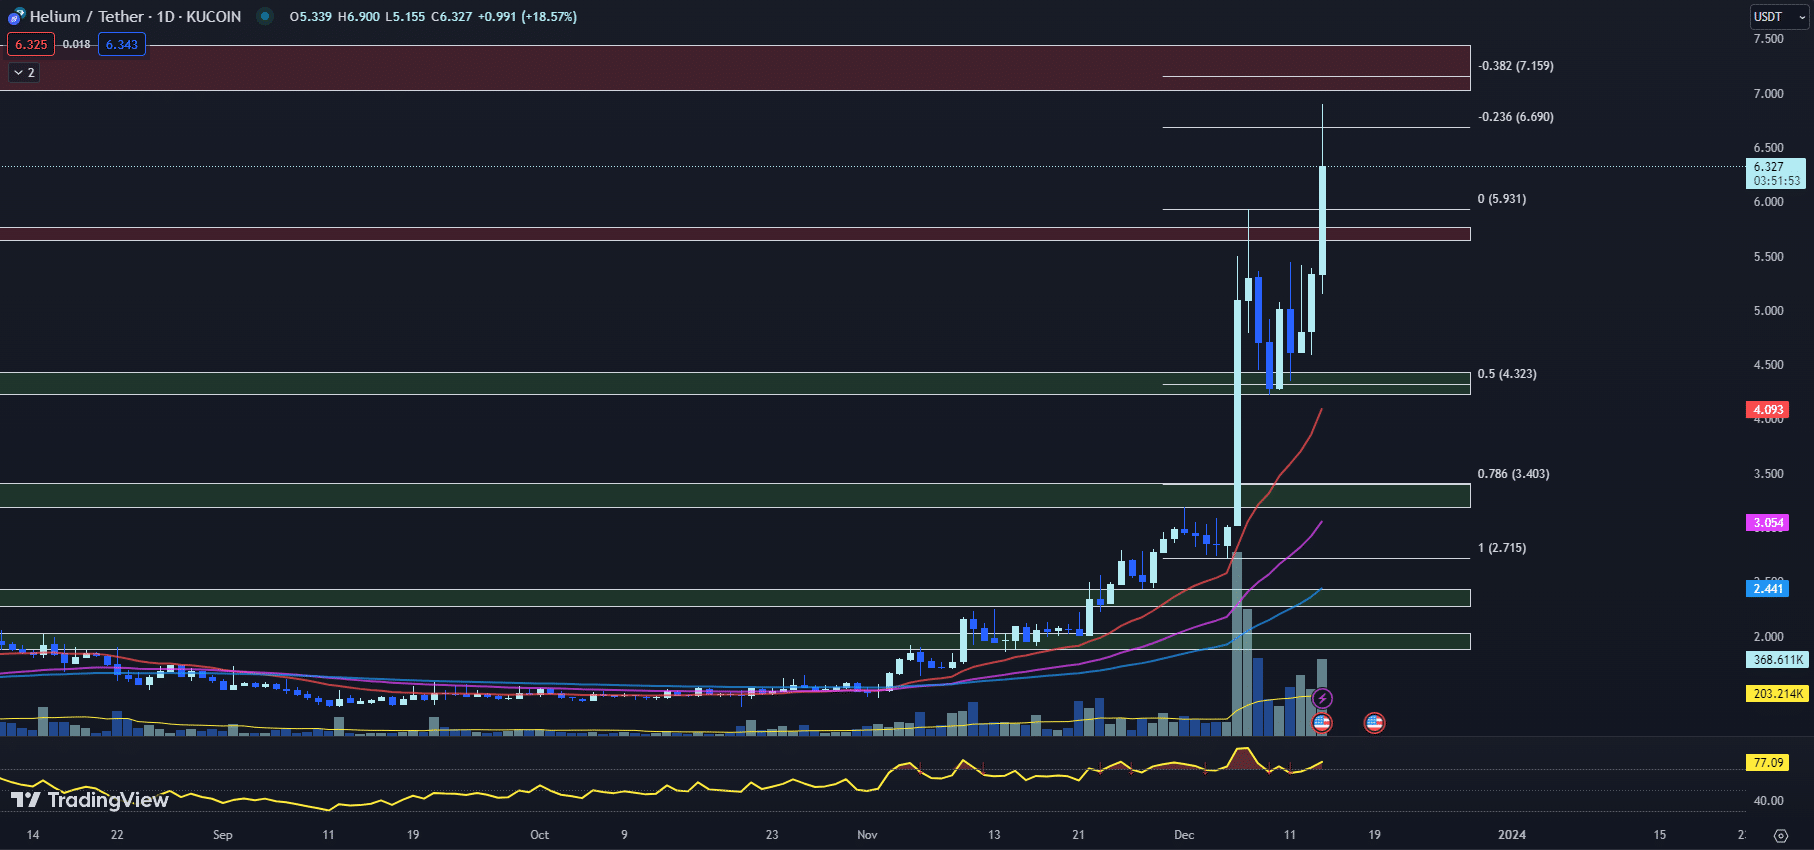 hnt price chart in tradingview